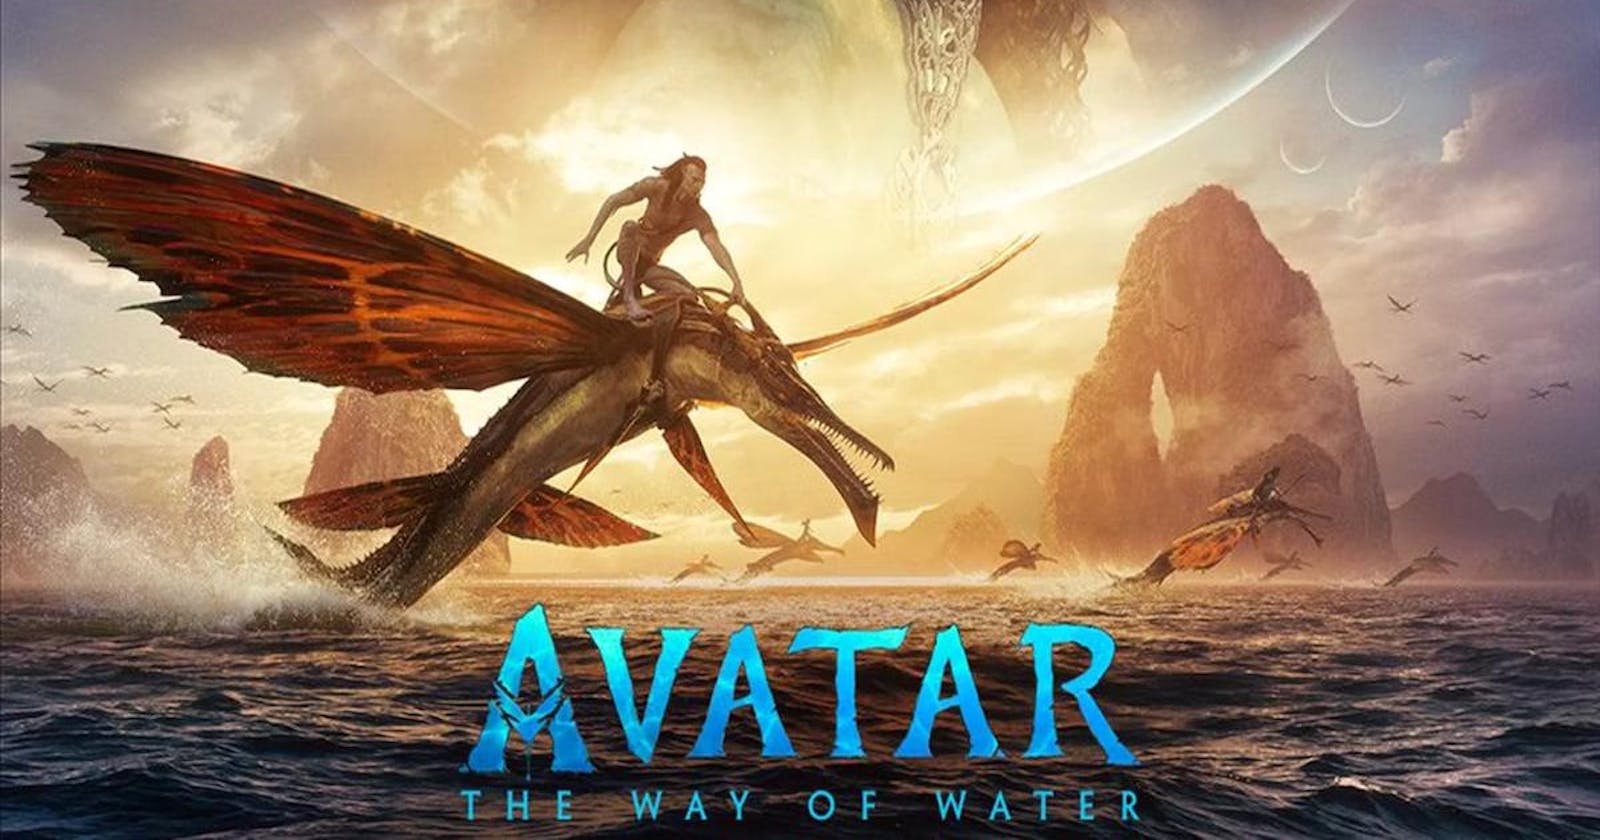 Avatar - The Way Of Water box office collection